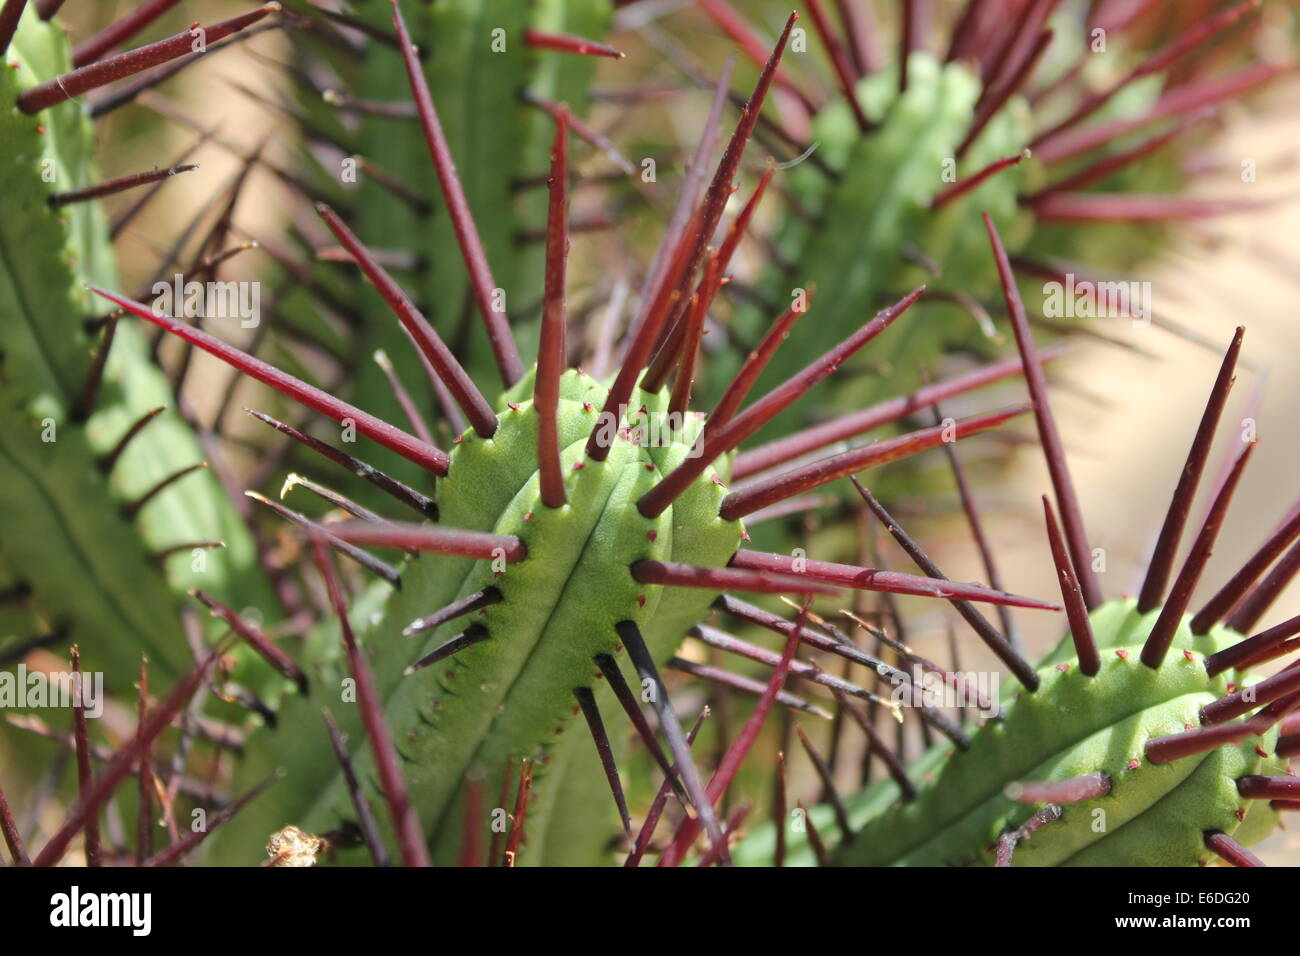 Cactus close up with purple spikes Stock Photo